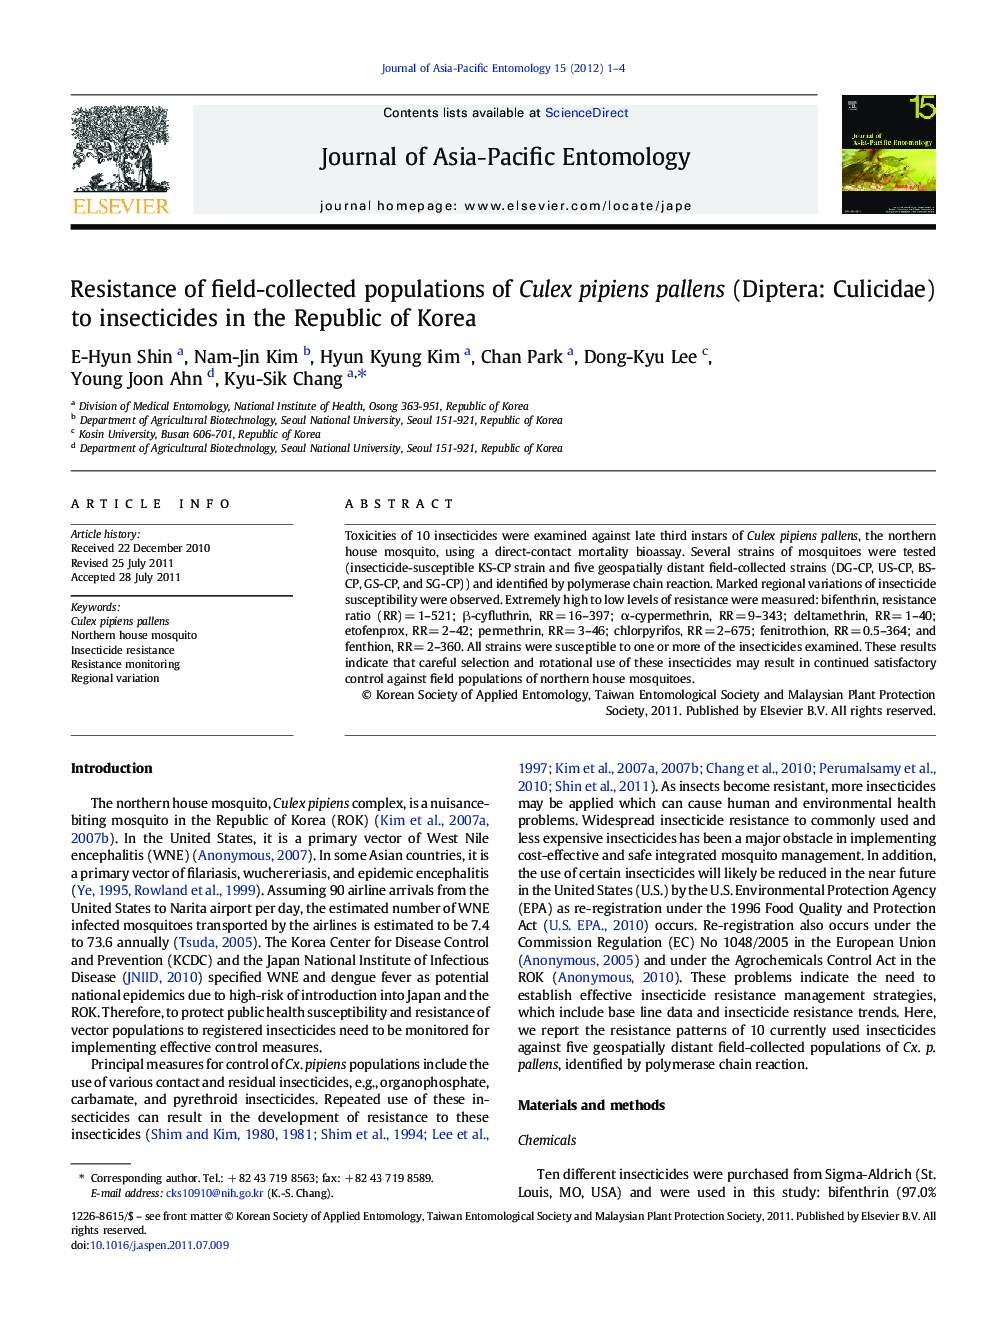 Resistance of field-collected populations of Culex pipiens pallens (Diptera: Culicidae) to insecticides in the Republic of Korea